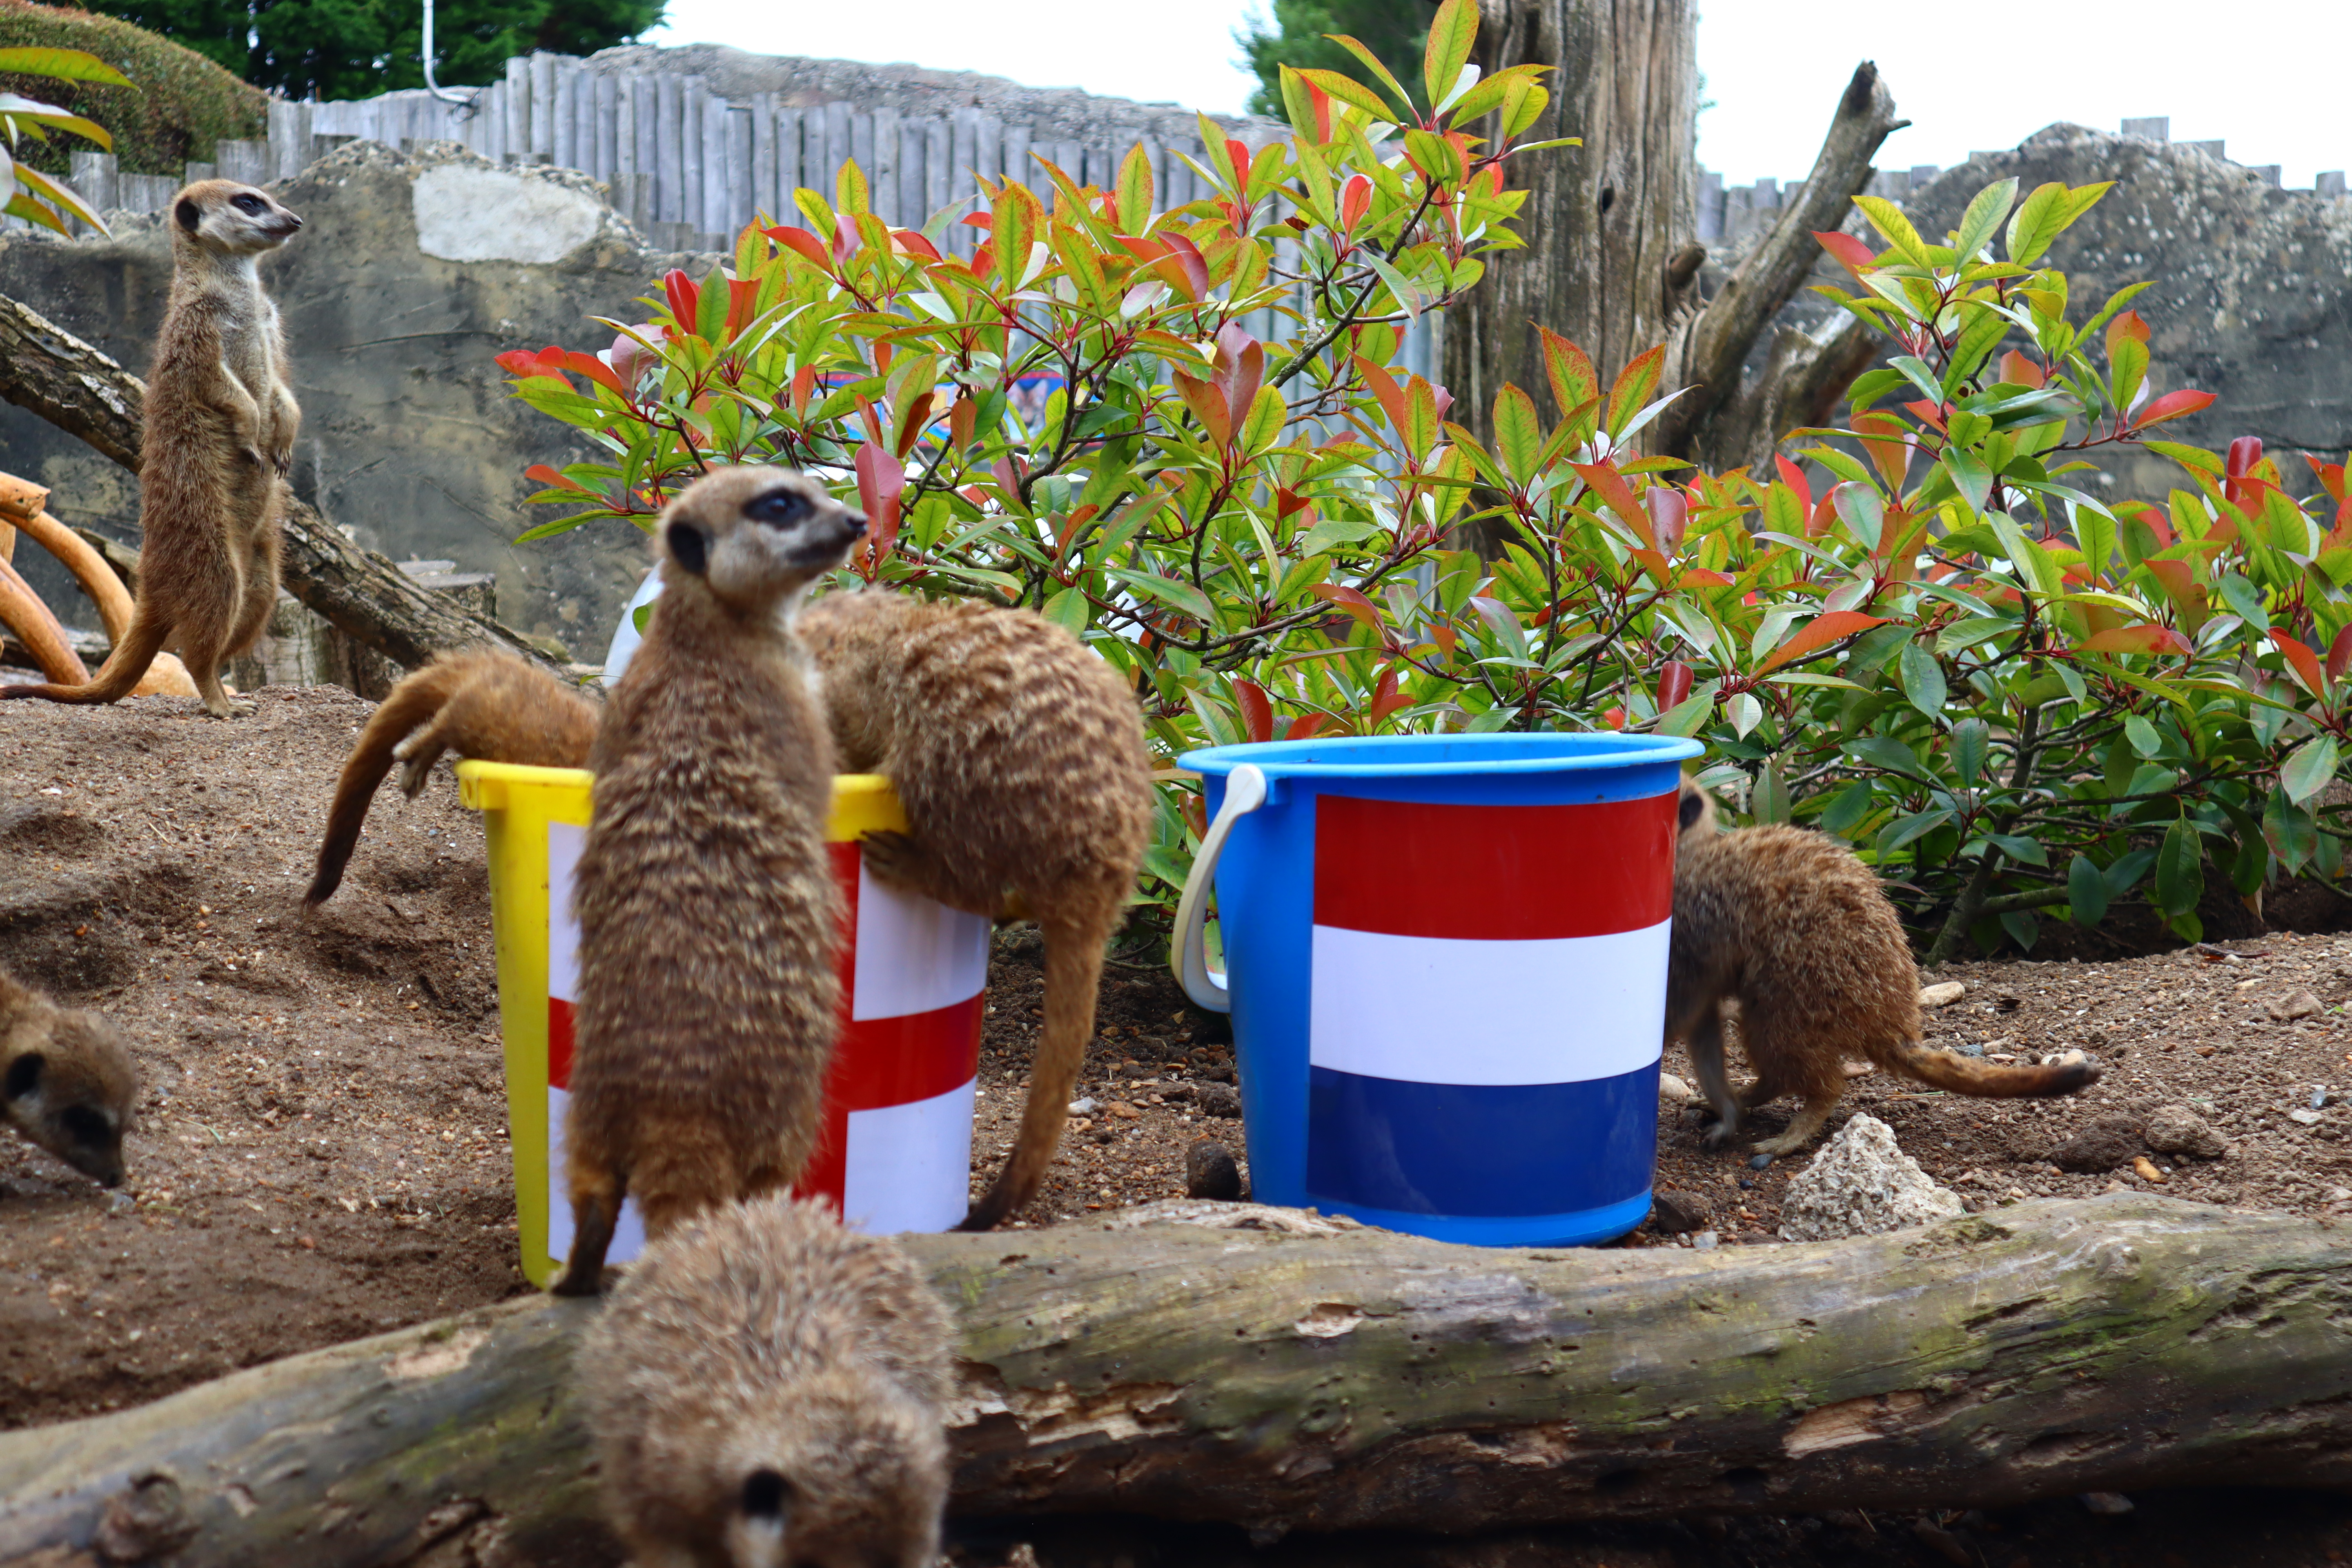   A group of meerkats surrounding a yellow bucket with an England flag on the side while a blue bucket with a Netherlands flag on the side is left untouched